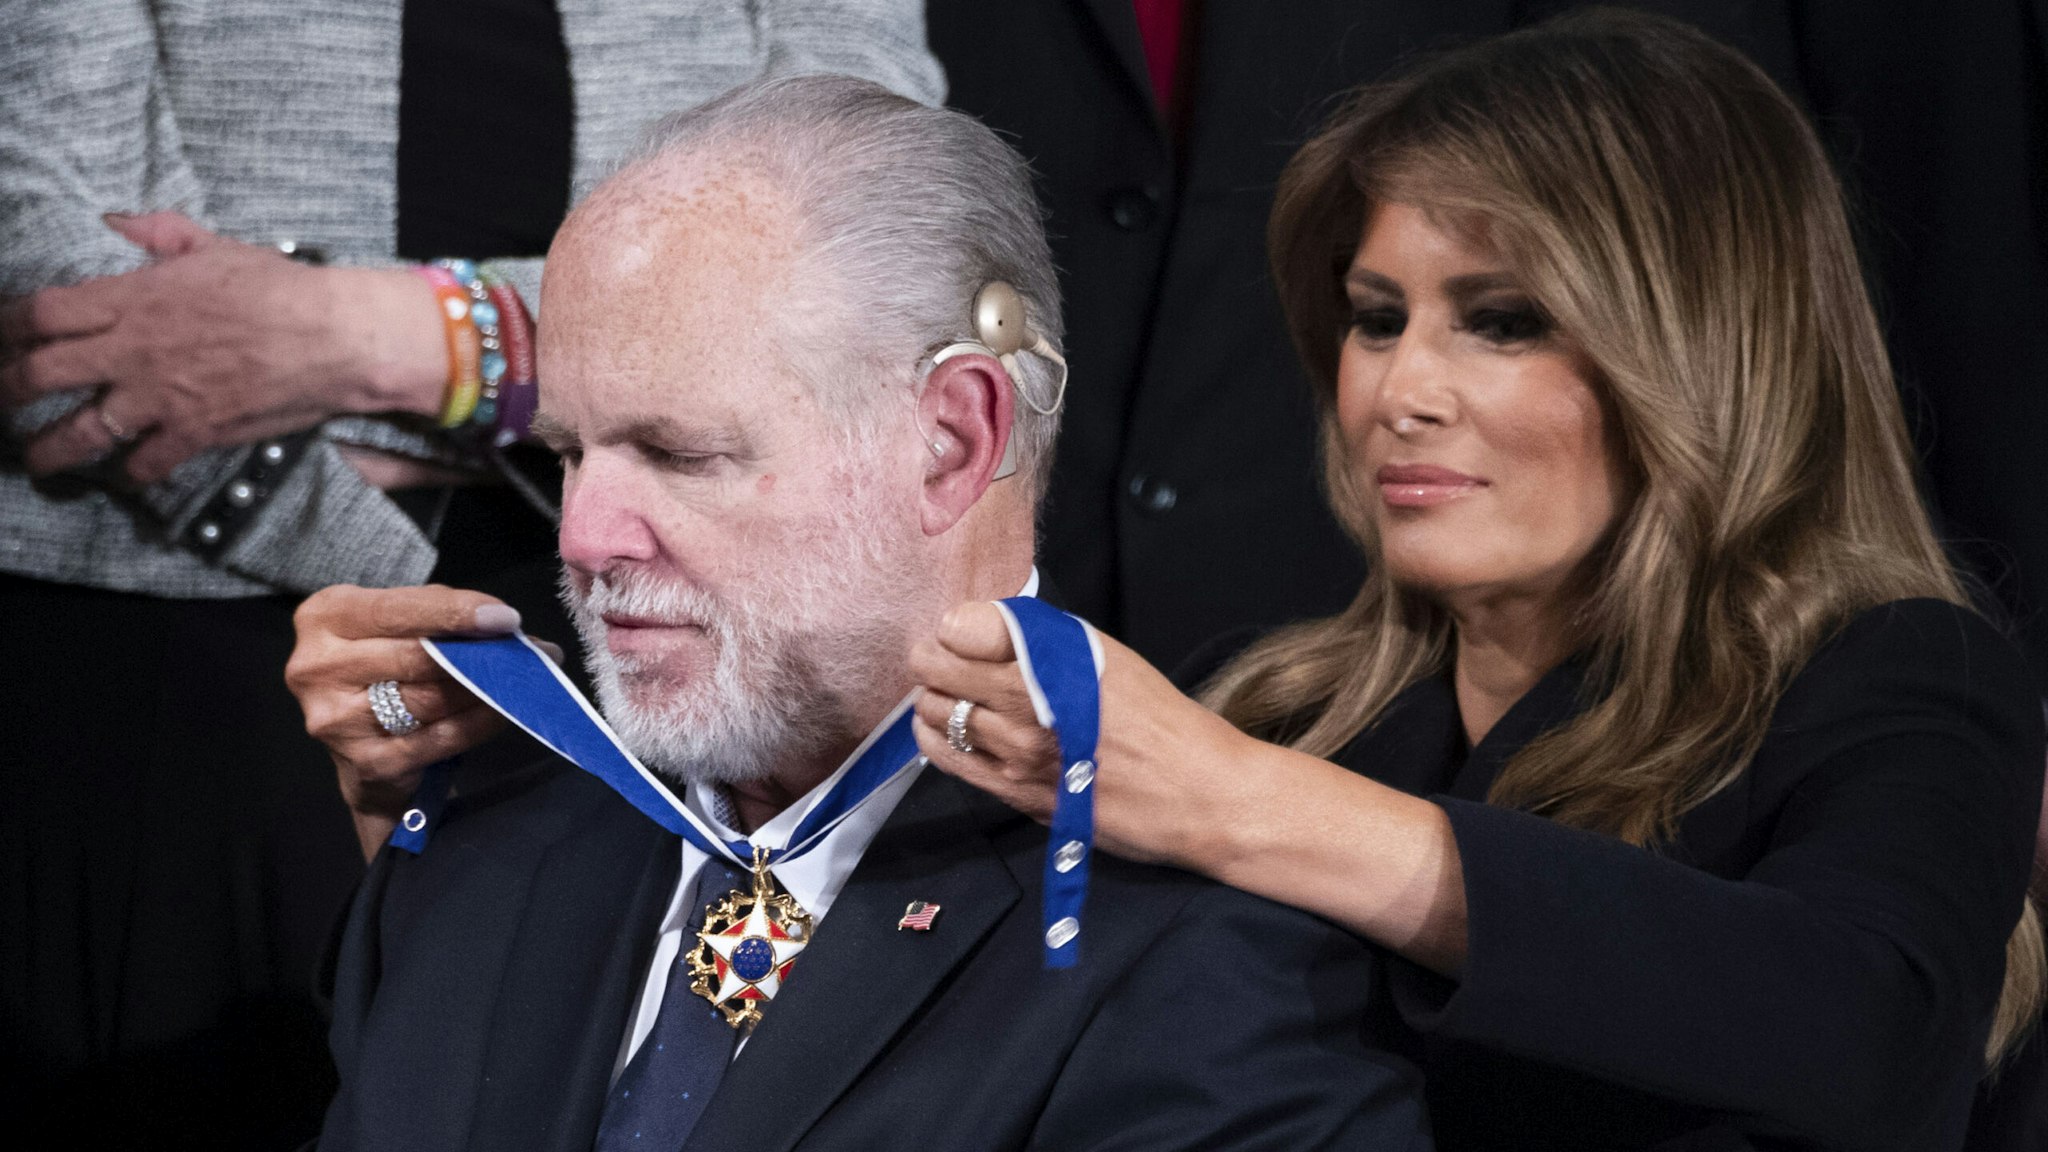 UNITED STATES - FEBRUARY 04: First Lady Melania Trump awards Rush Limbaugh the Presidential Medal of Freedom during President Donald Trumps State of the Union address in the House Chamber on Tuesday, February 4, 2020.